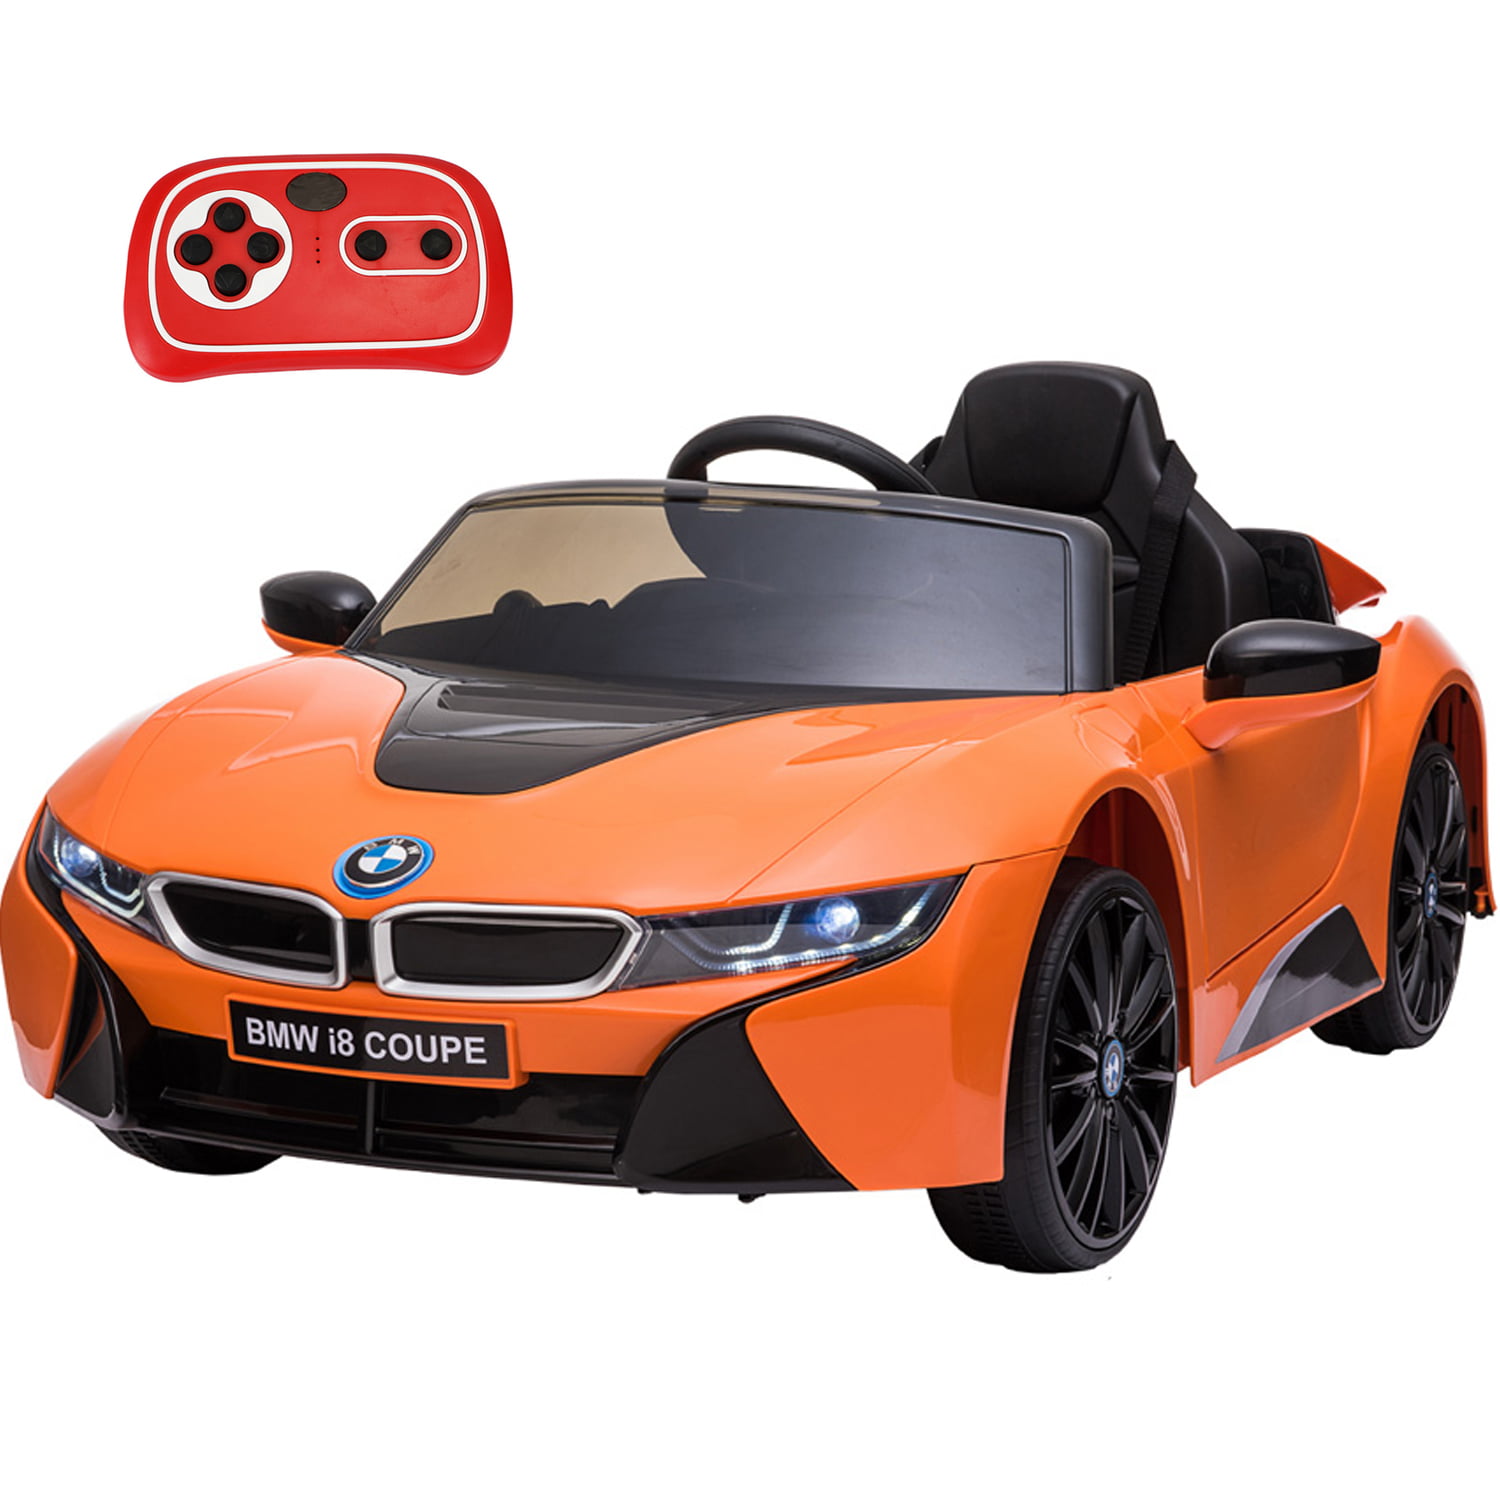 SESSLIFE 12V Kids Electric Vehicles, Ride on Car with Remote Control, Music, Horn, Lights, Battery Powered BMW Kids Cars to Drive Ride on Toy for Girls Boys 3-5, Orange, X1167